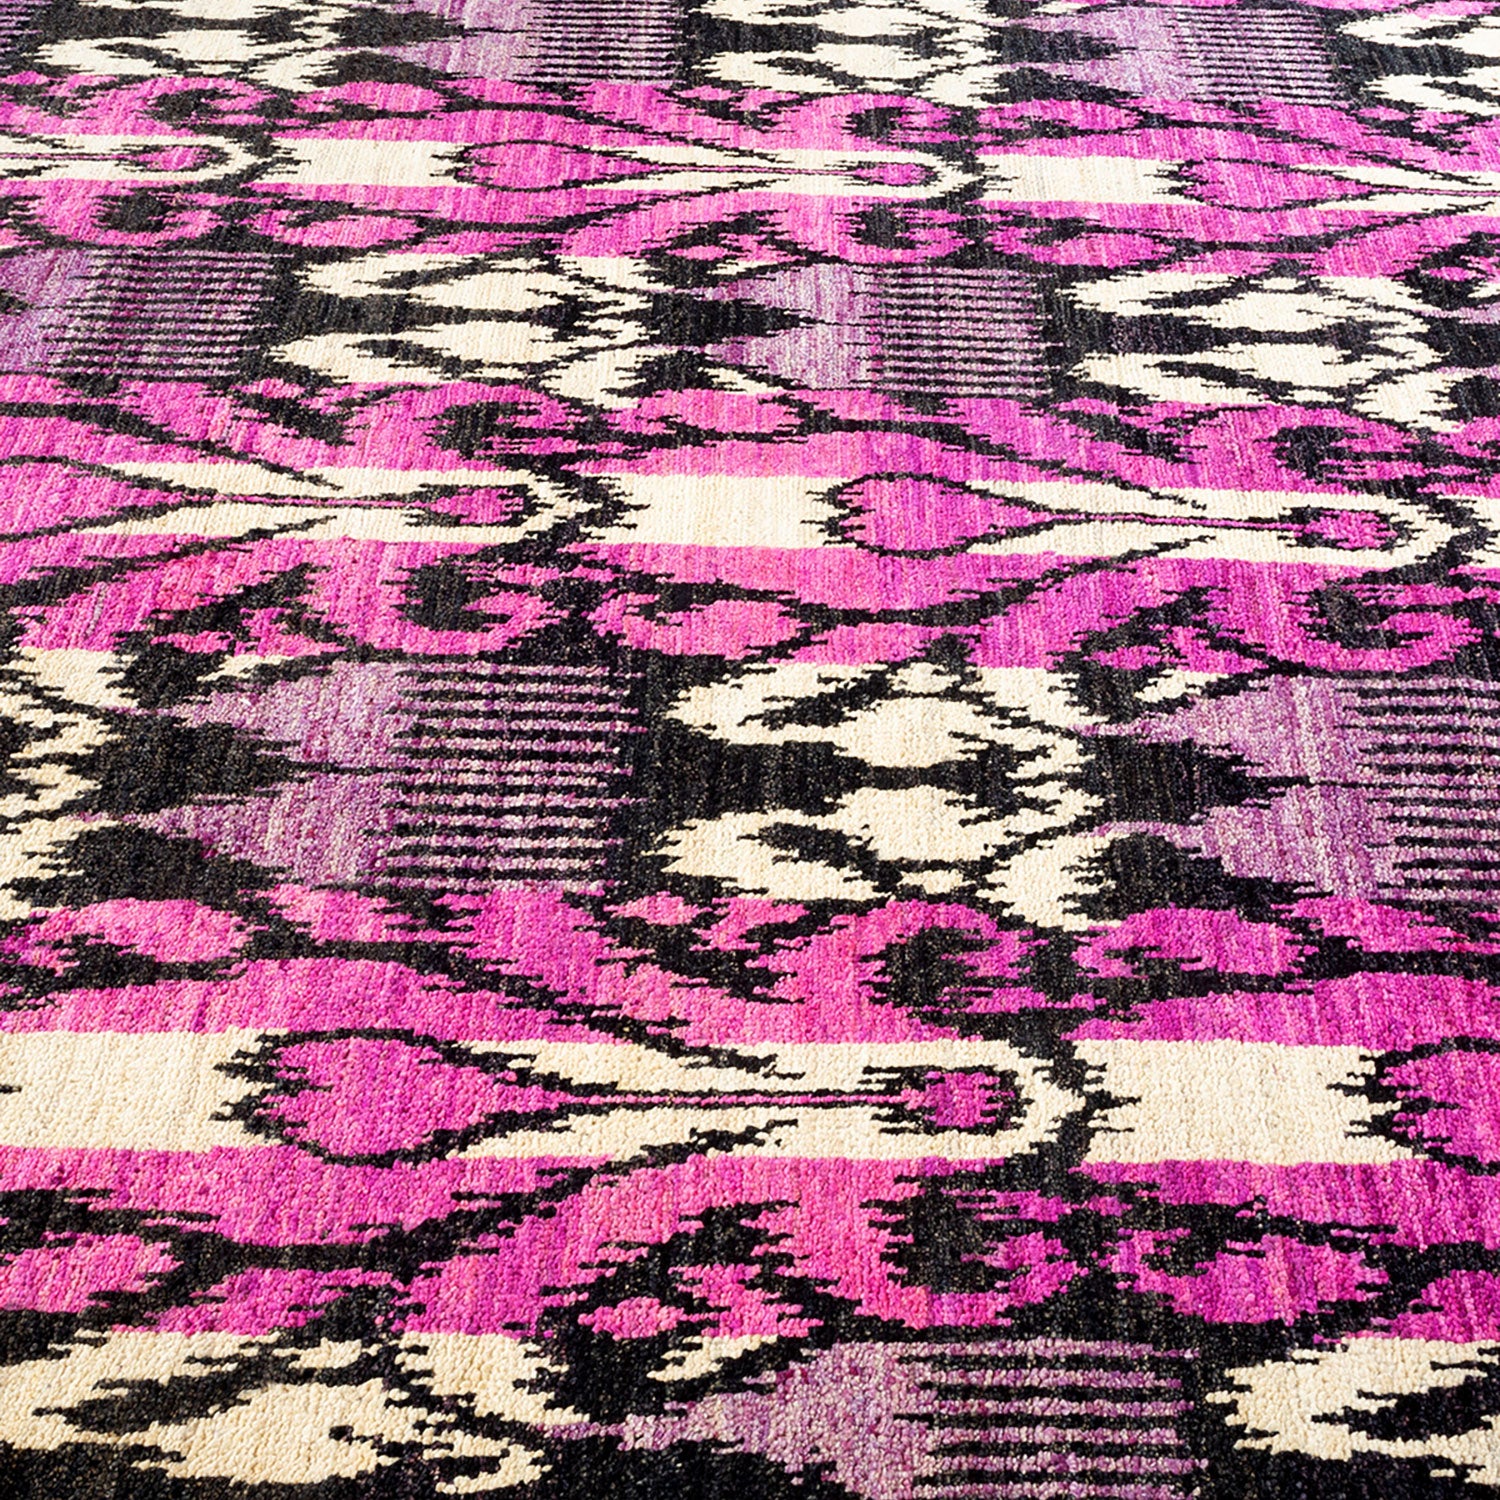 Close-up view of dynamic, opulent carpet with bold pattern.